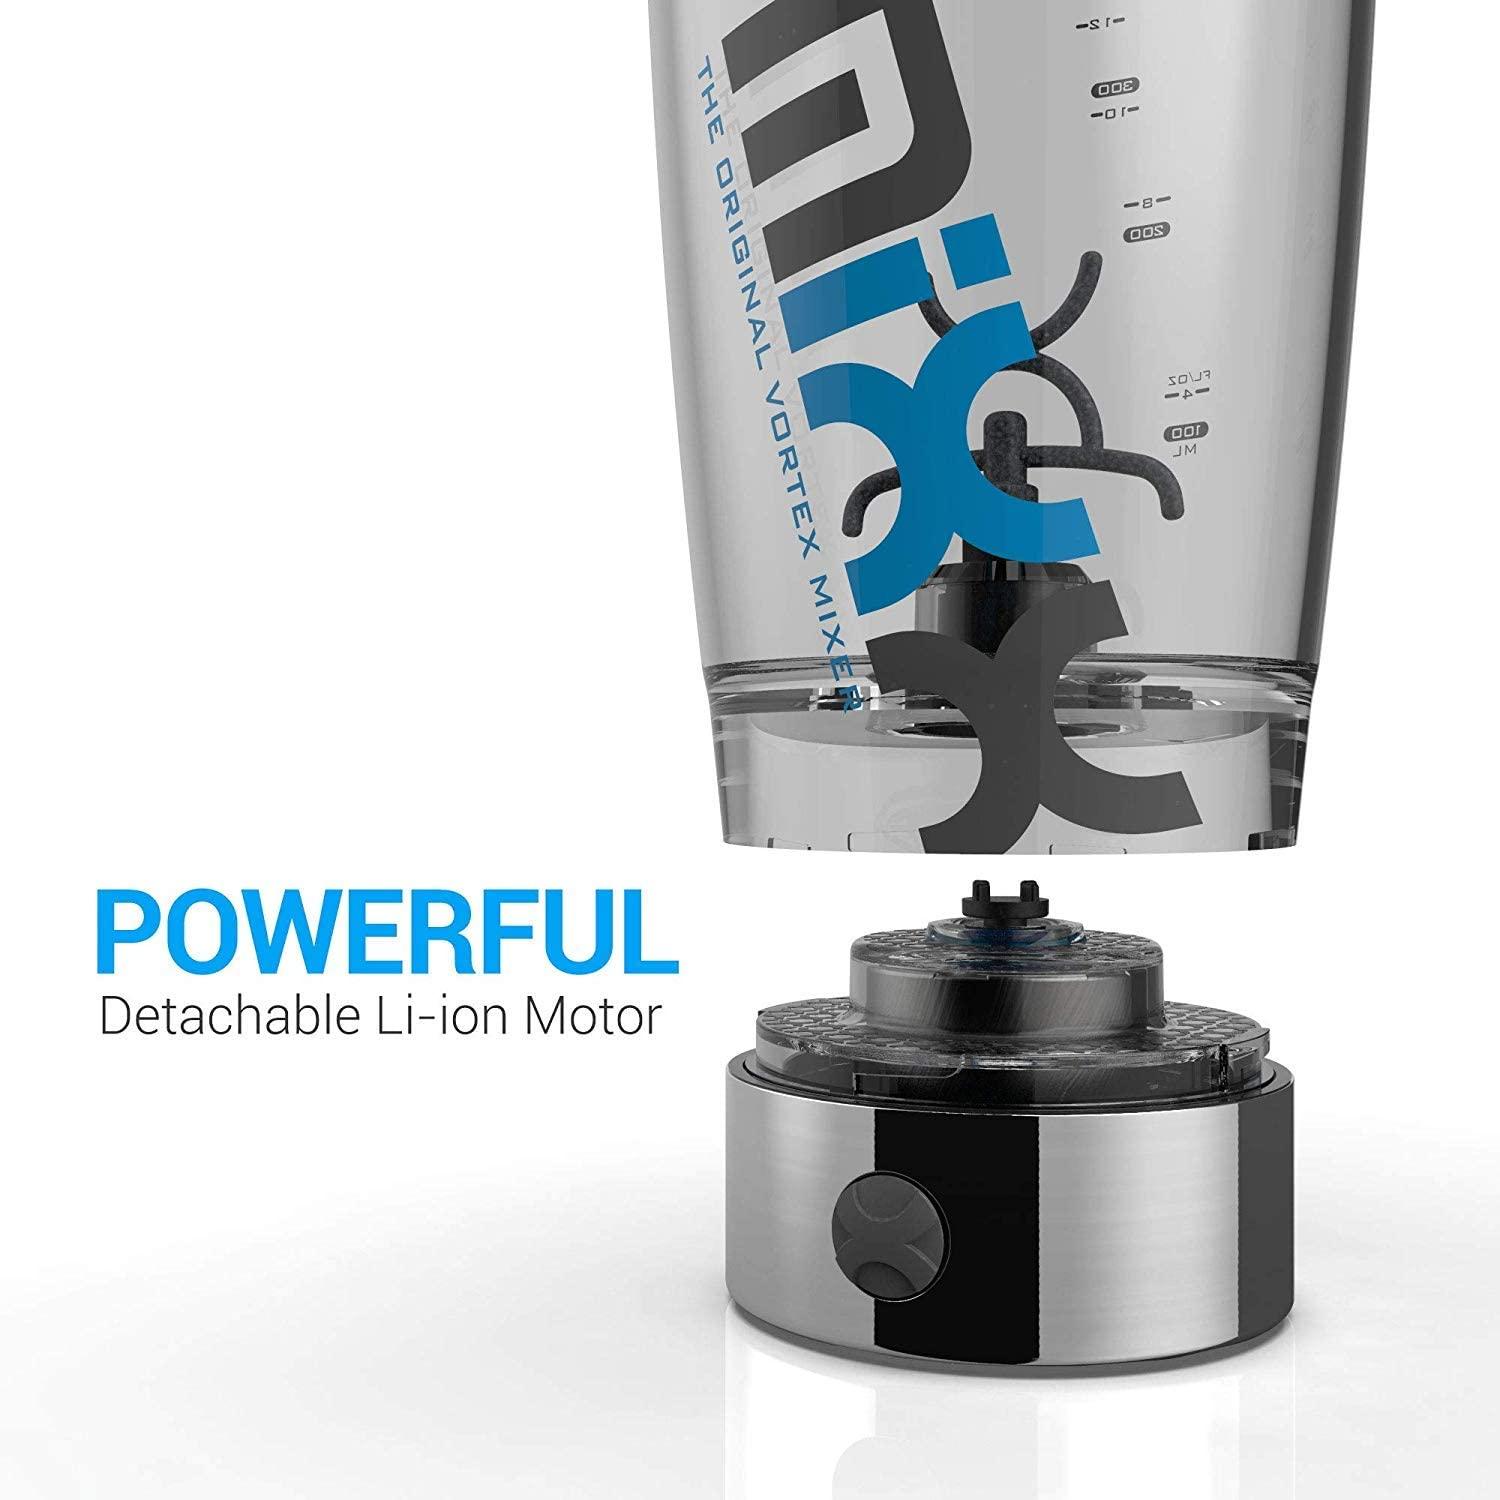 ProMiXX USB Powered Shaker Cup - Fitness Review 